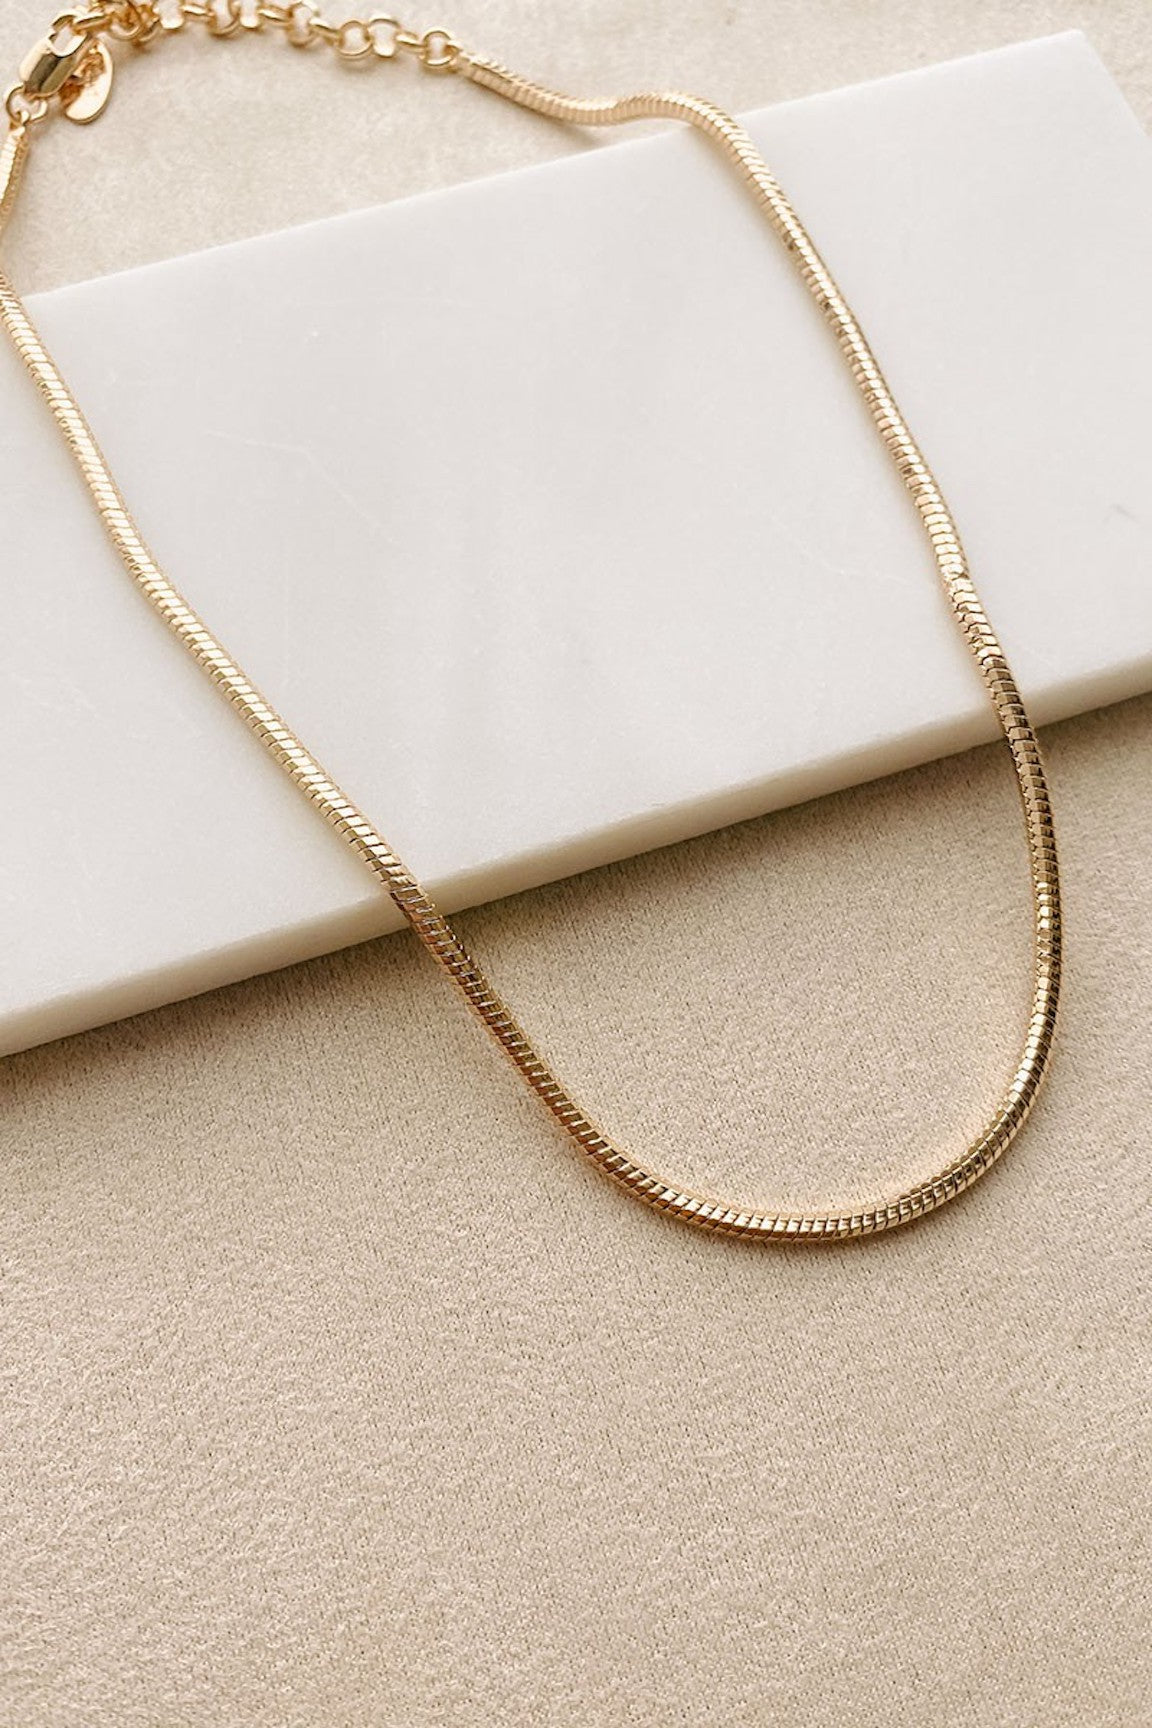 Carter Gold Snake Chain Necklace